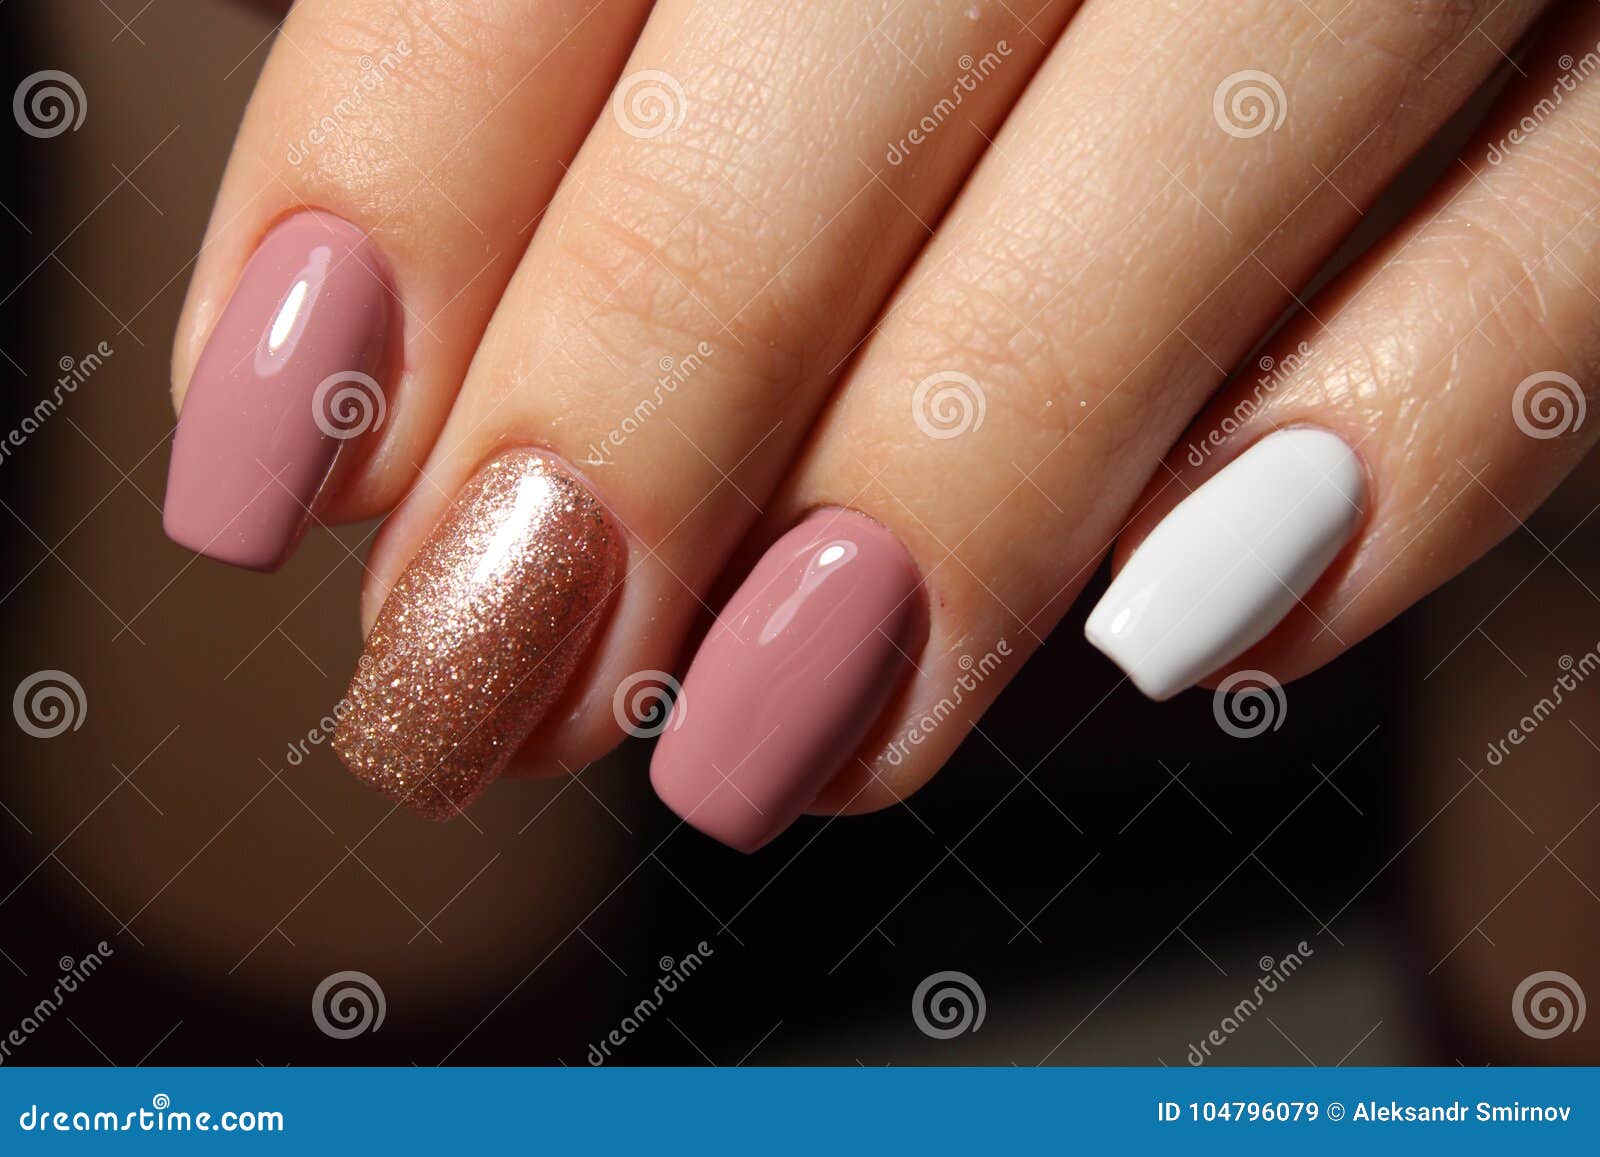 4. "Beautiful Nail Art Pictures for Your Next Manicure" - wide 8